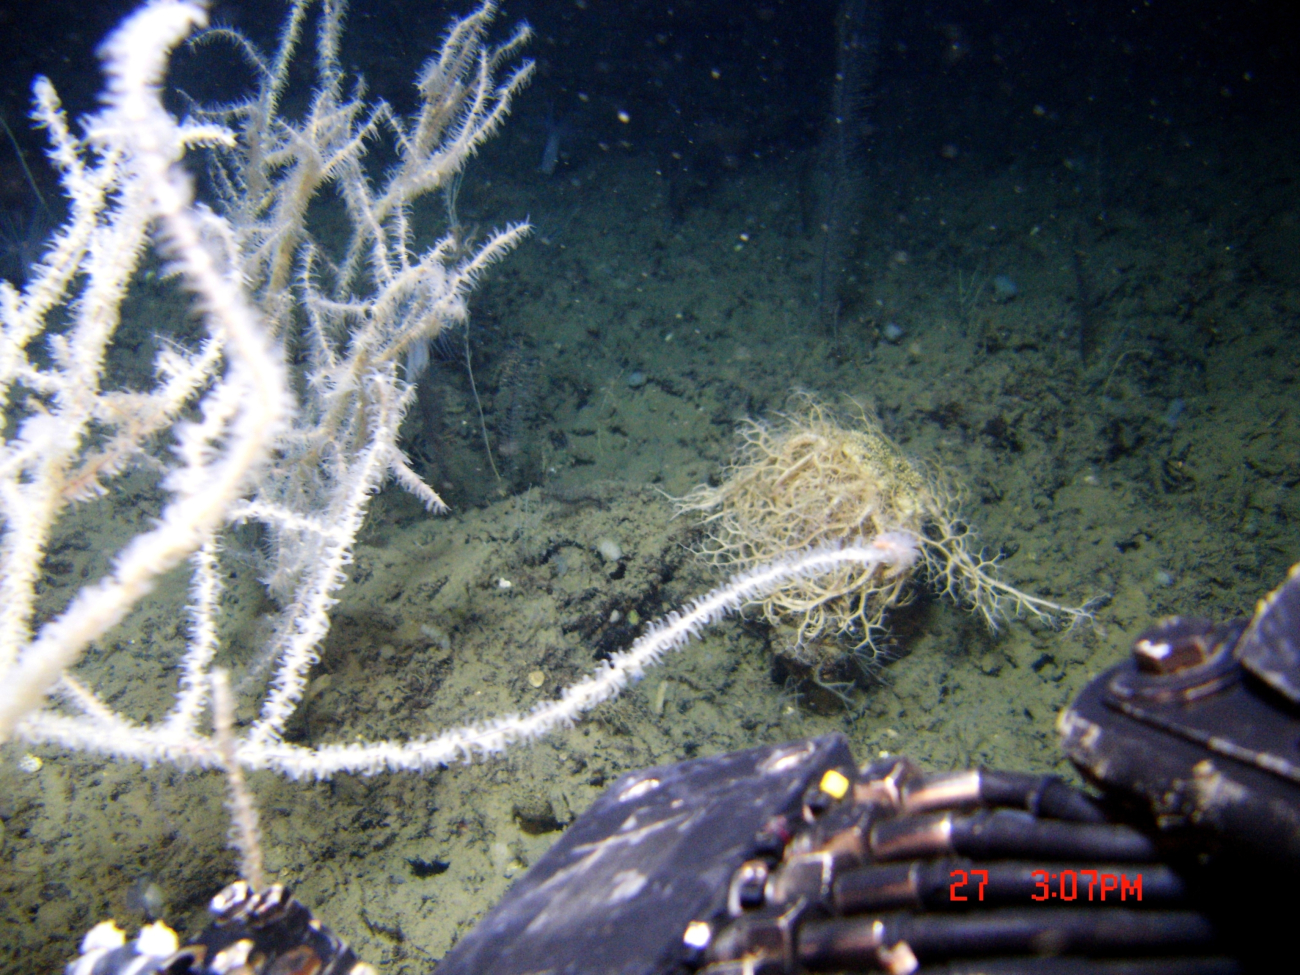 Deep sea coral, Leiopathes glaberrima, and large basket star on sea floor